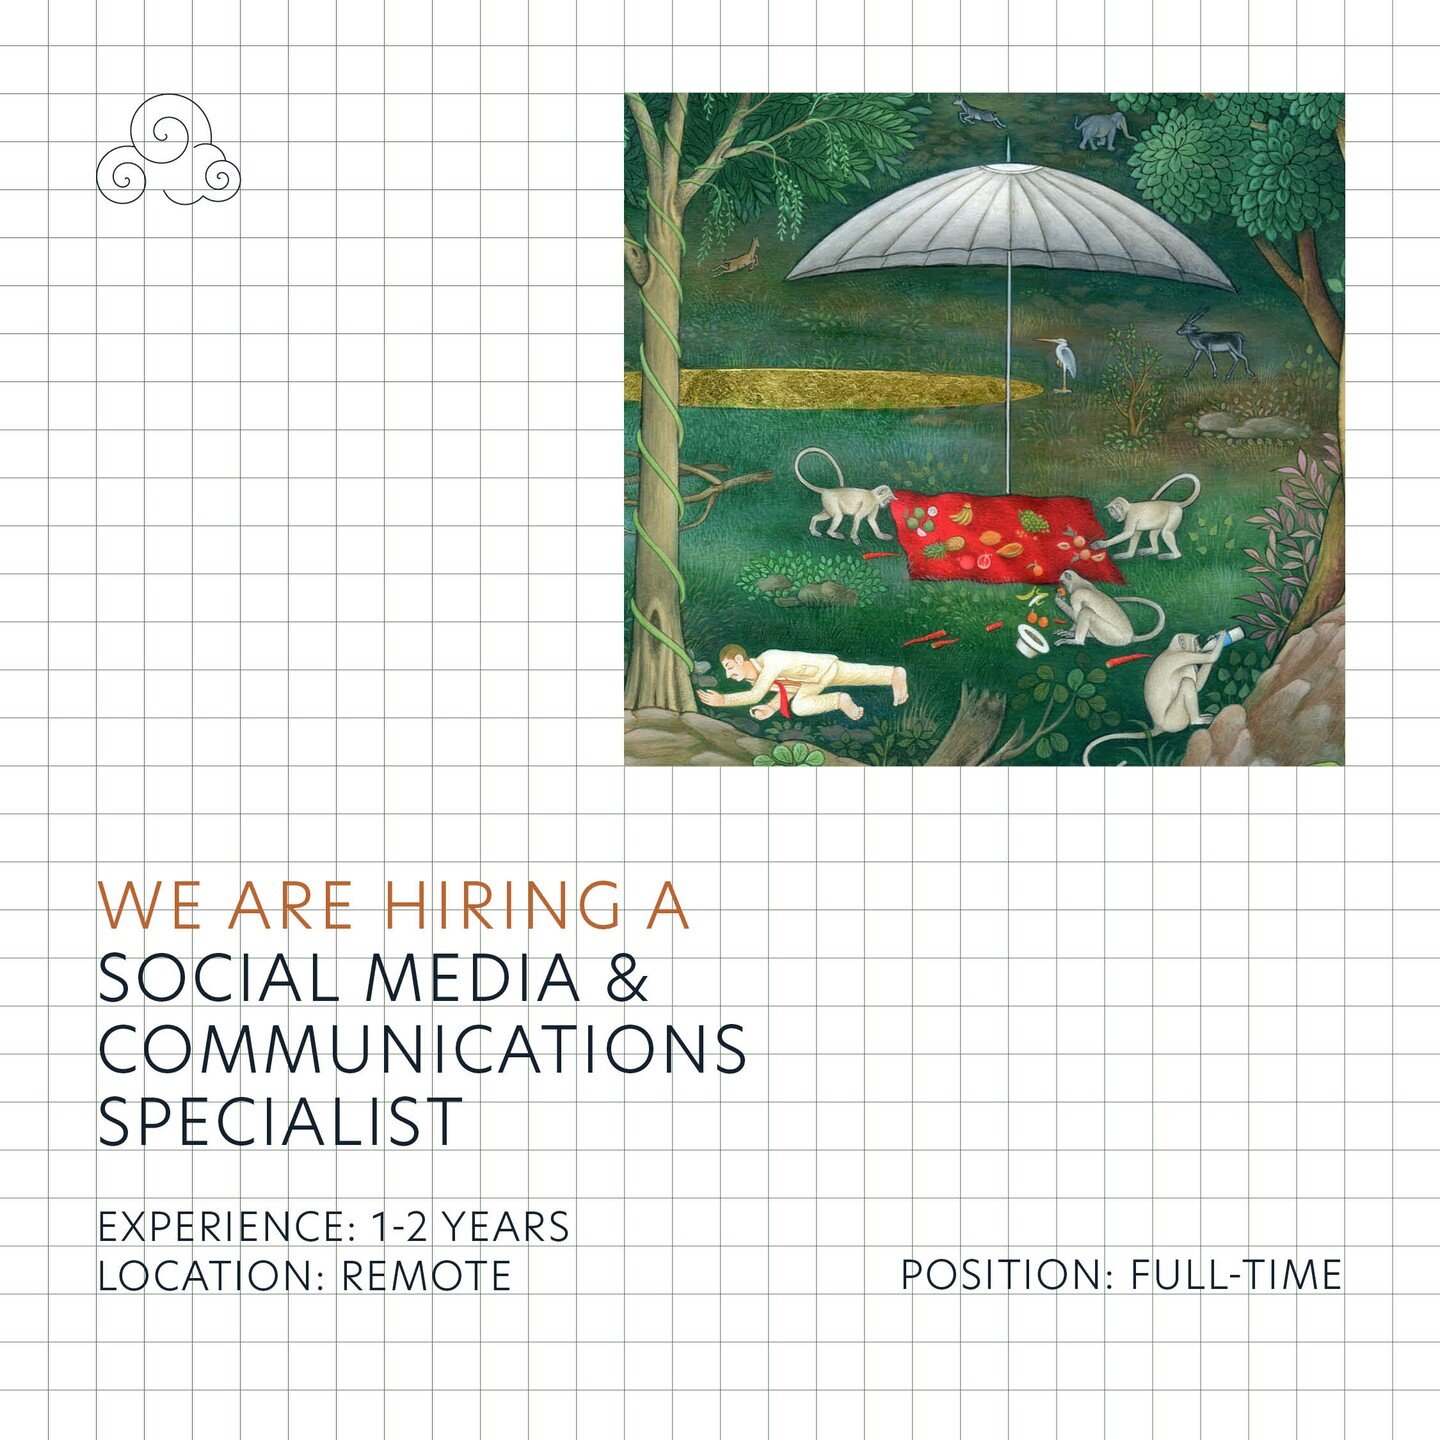 Monsoon Malabar is looking for a full-time Social Media &amp; Communications Specialist who has experience with copywriting and an interest in art and design.

To apply, send us your CV and 3 writing samples at hello@monsoonmalabar.co.

🎨 @waswo.x.w